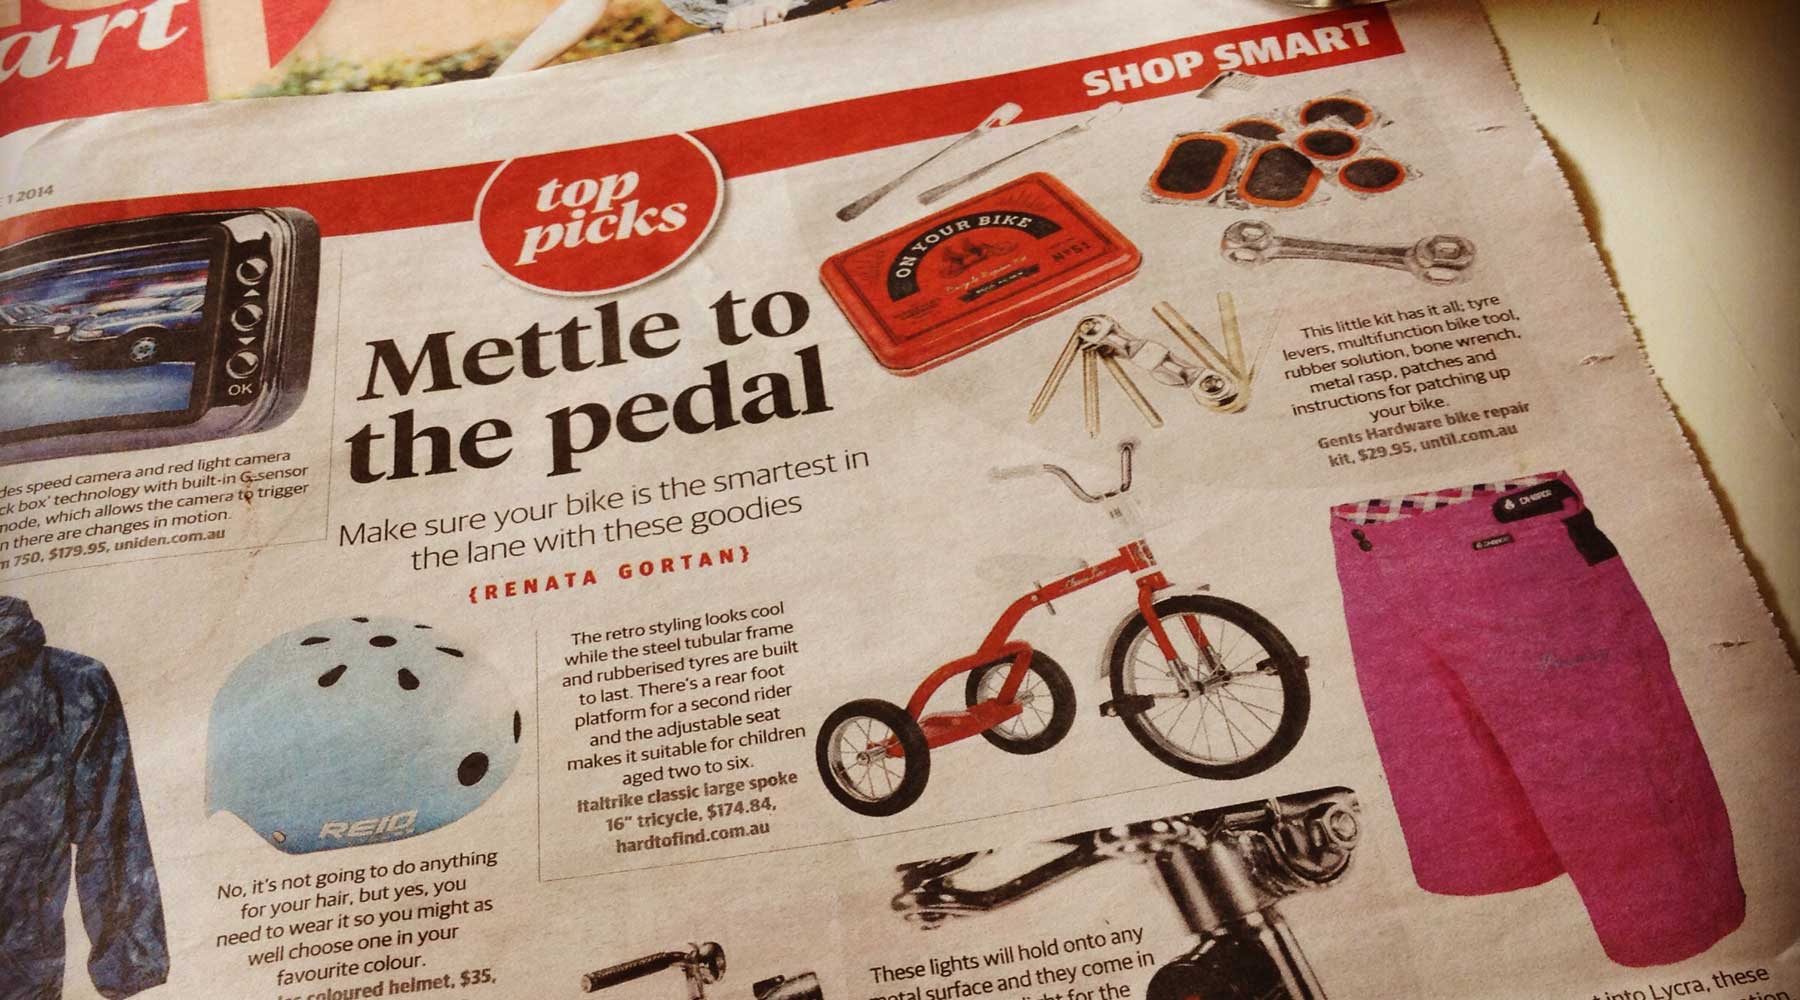 Sunday Telegraph features DHaRCO in Shop Smart